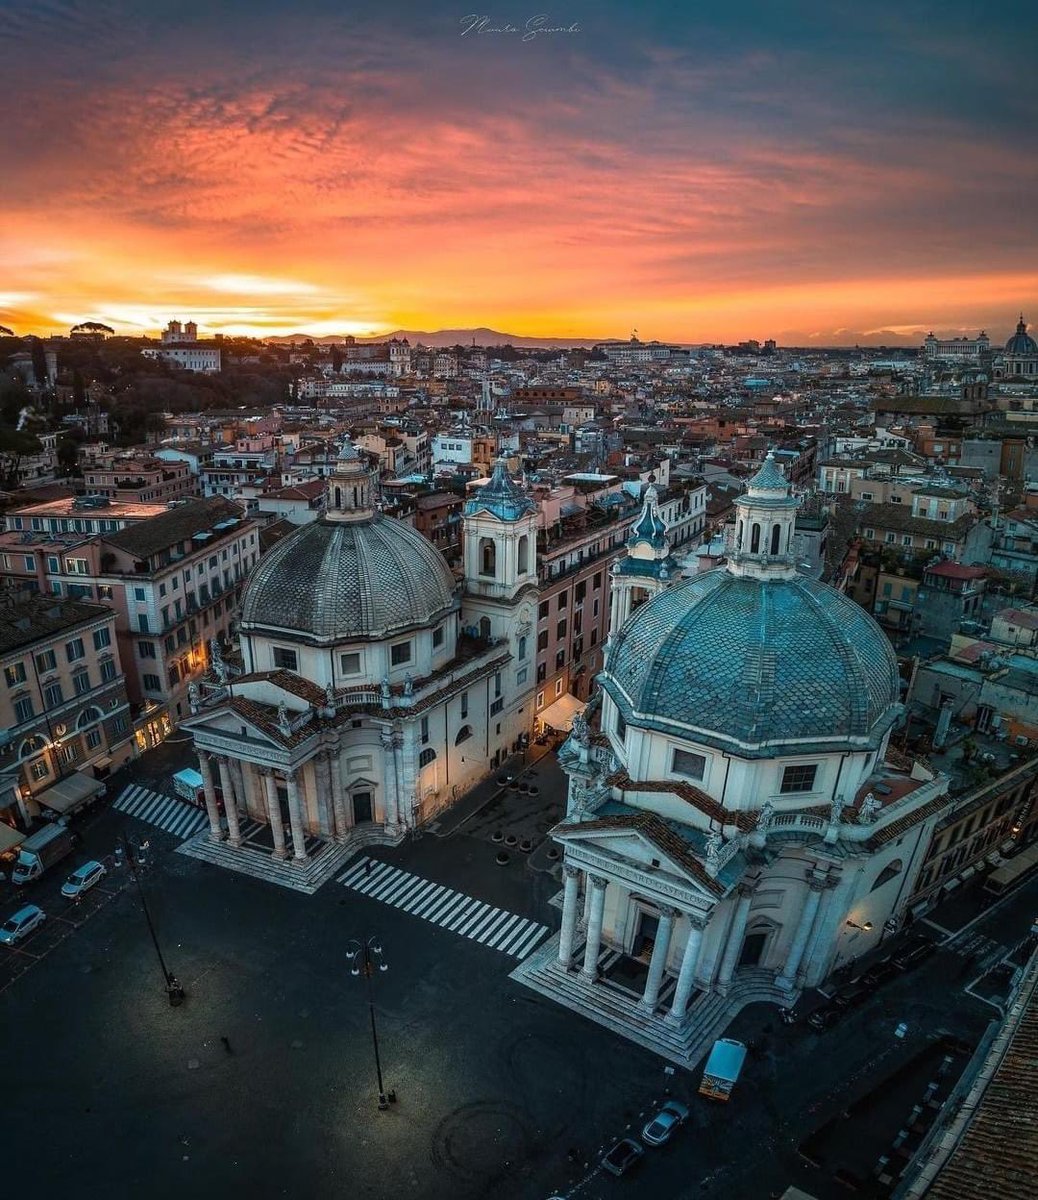 Sunset on the twin churches of #PiazzadelPopolo, Rome